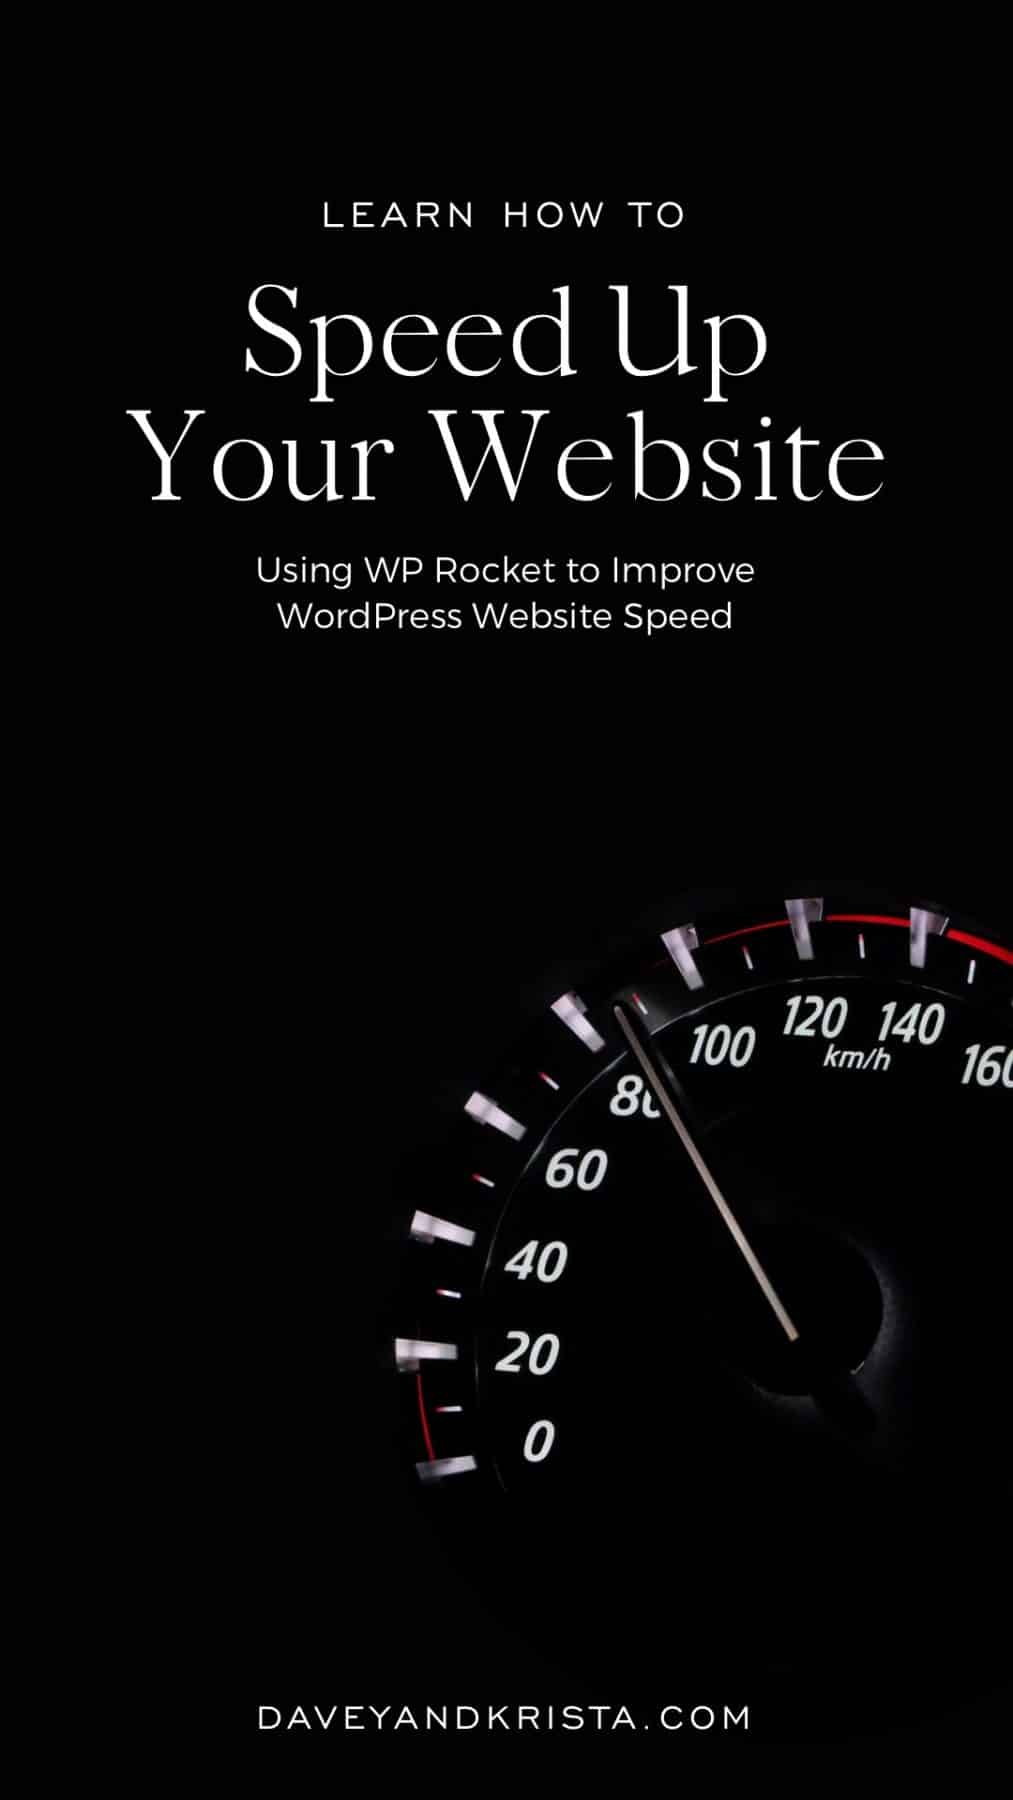 Learn how to speed up your WordPress website using WP Rocket | via DaveyandKrista.com